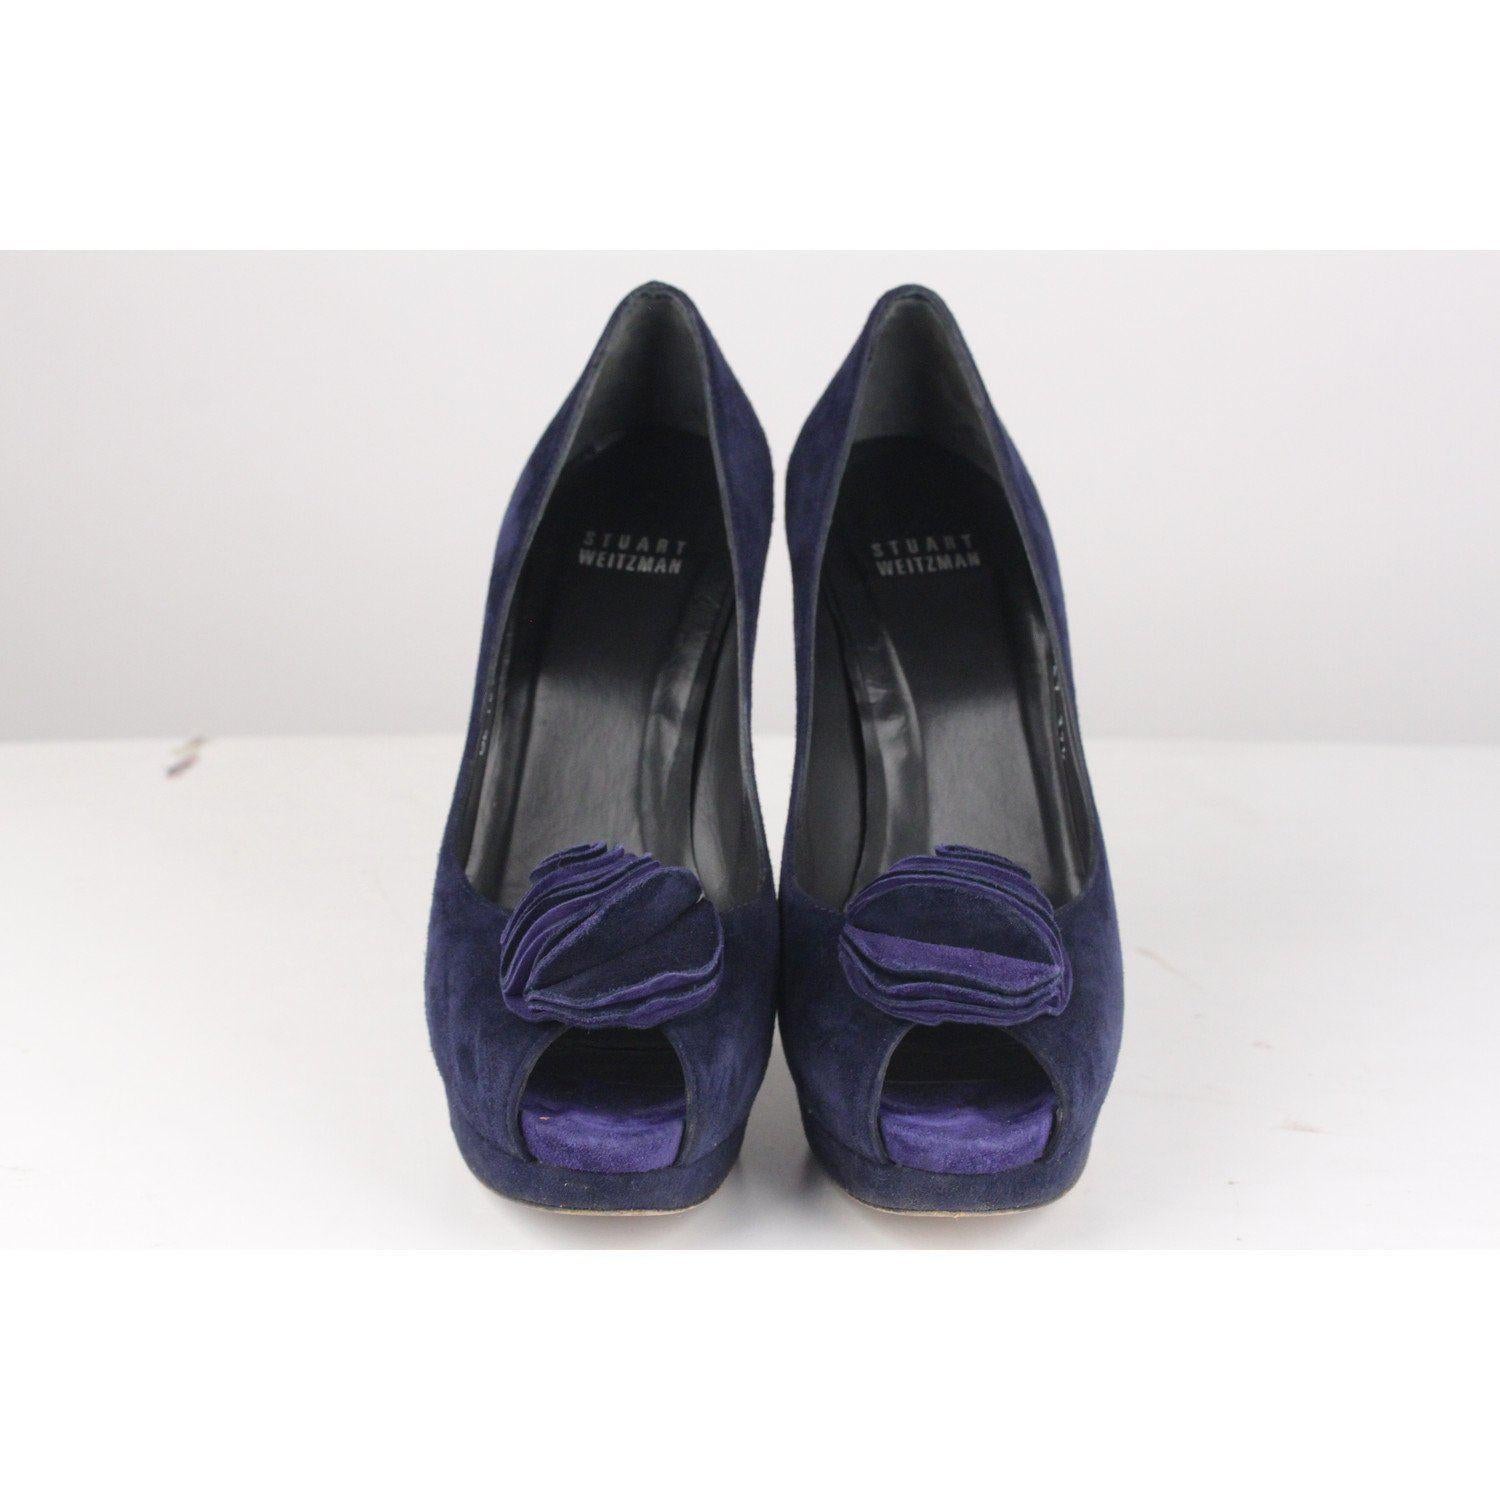 MATERIAL: Suede COLOR: Blue MODEL: Open toe GENDER: Women CONDITION DETAILS: Some normal wear of use (scuffs and light faded part) on suede, some wear of use on the outsoles, some wear of use on the heels Any other detail which is not mentioned may